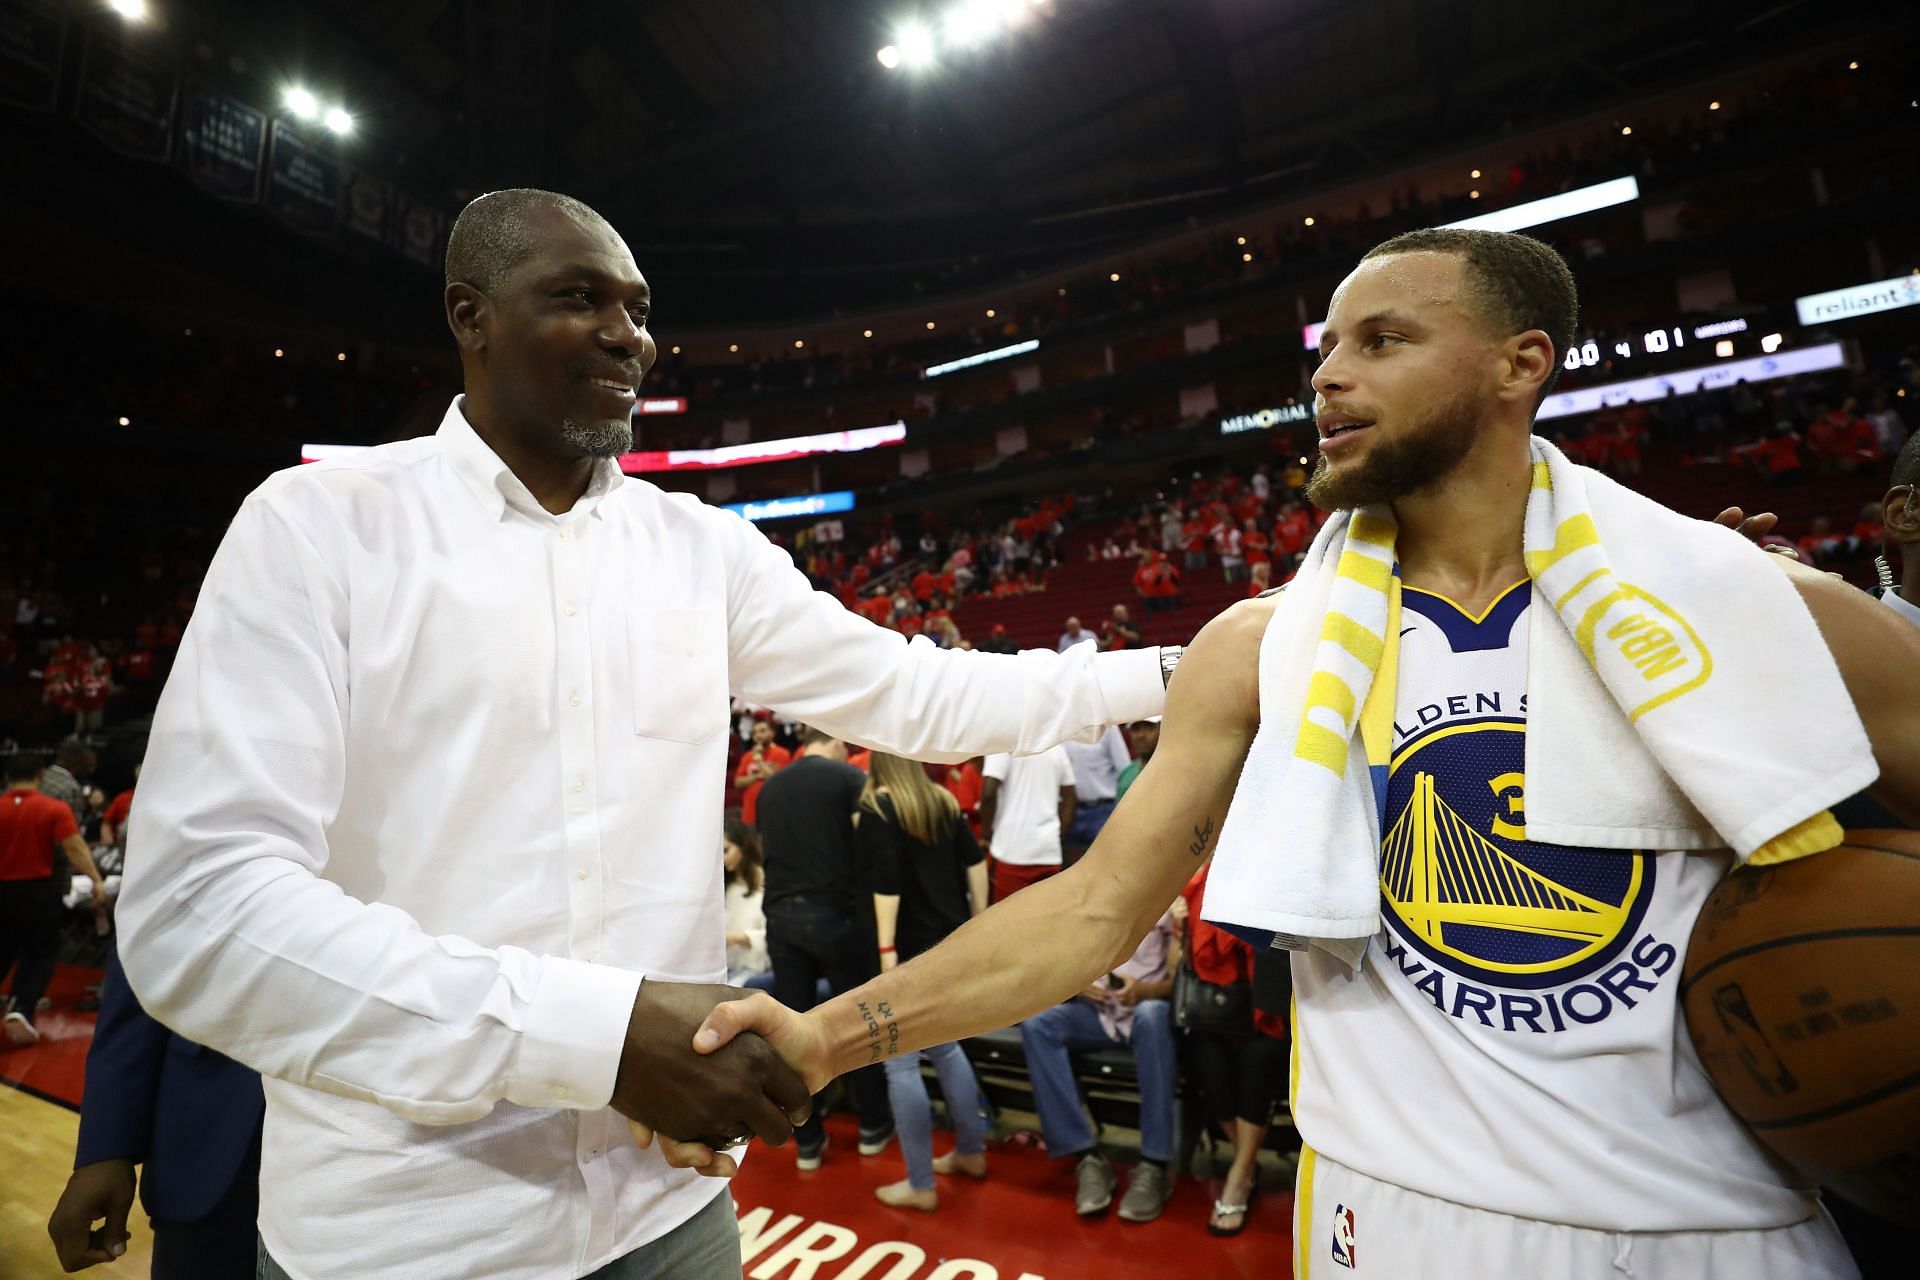 Hakeem Olajuwon (left) shaking hands with Stephen Curry (right)